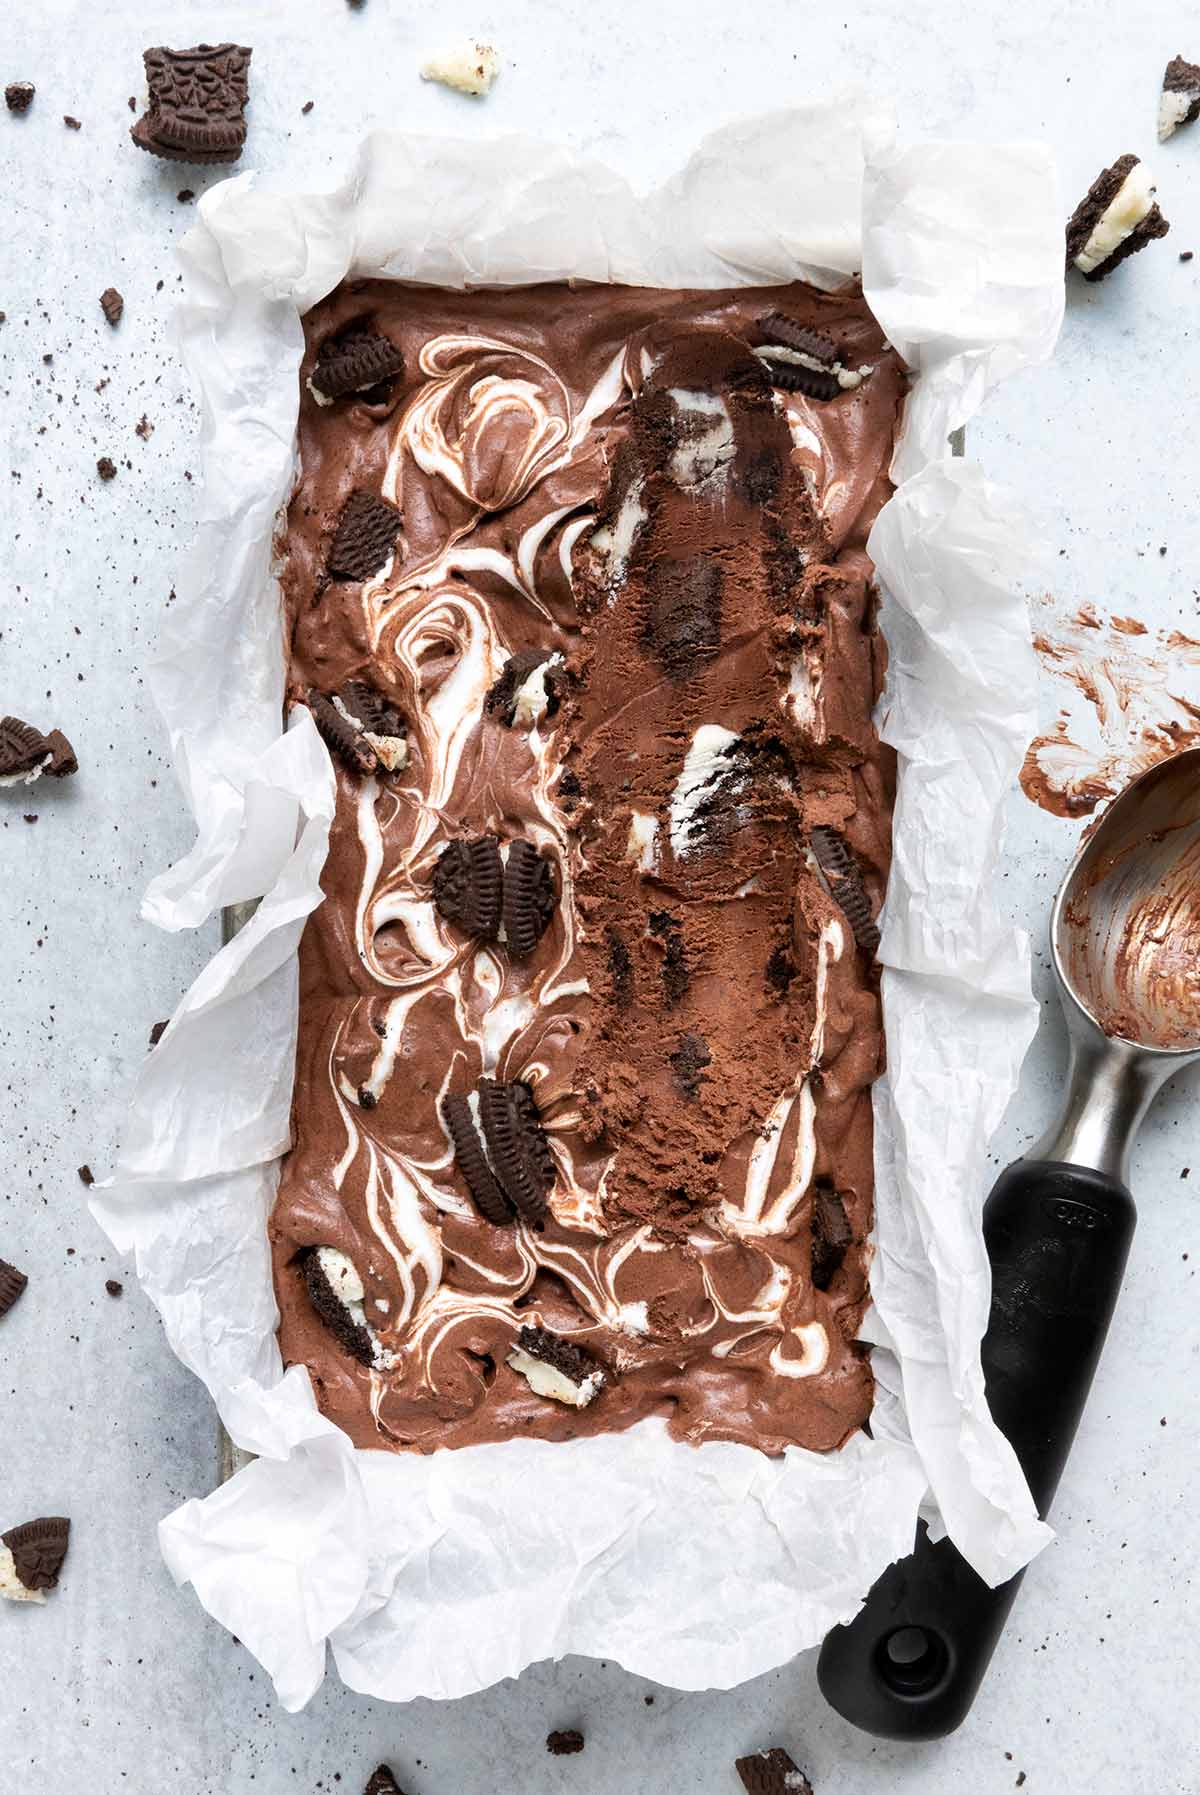 A loaf pan filled with chocolate Oreo ice cream with pieces of Oreo scattered around it and a ice cream scoop on the side.